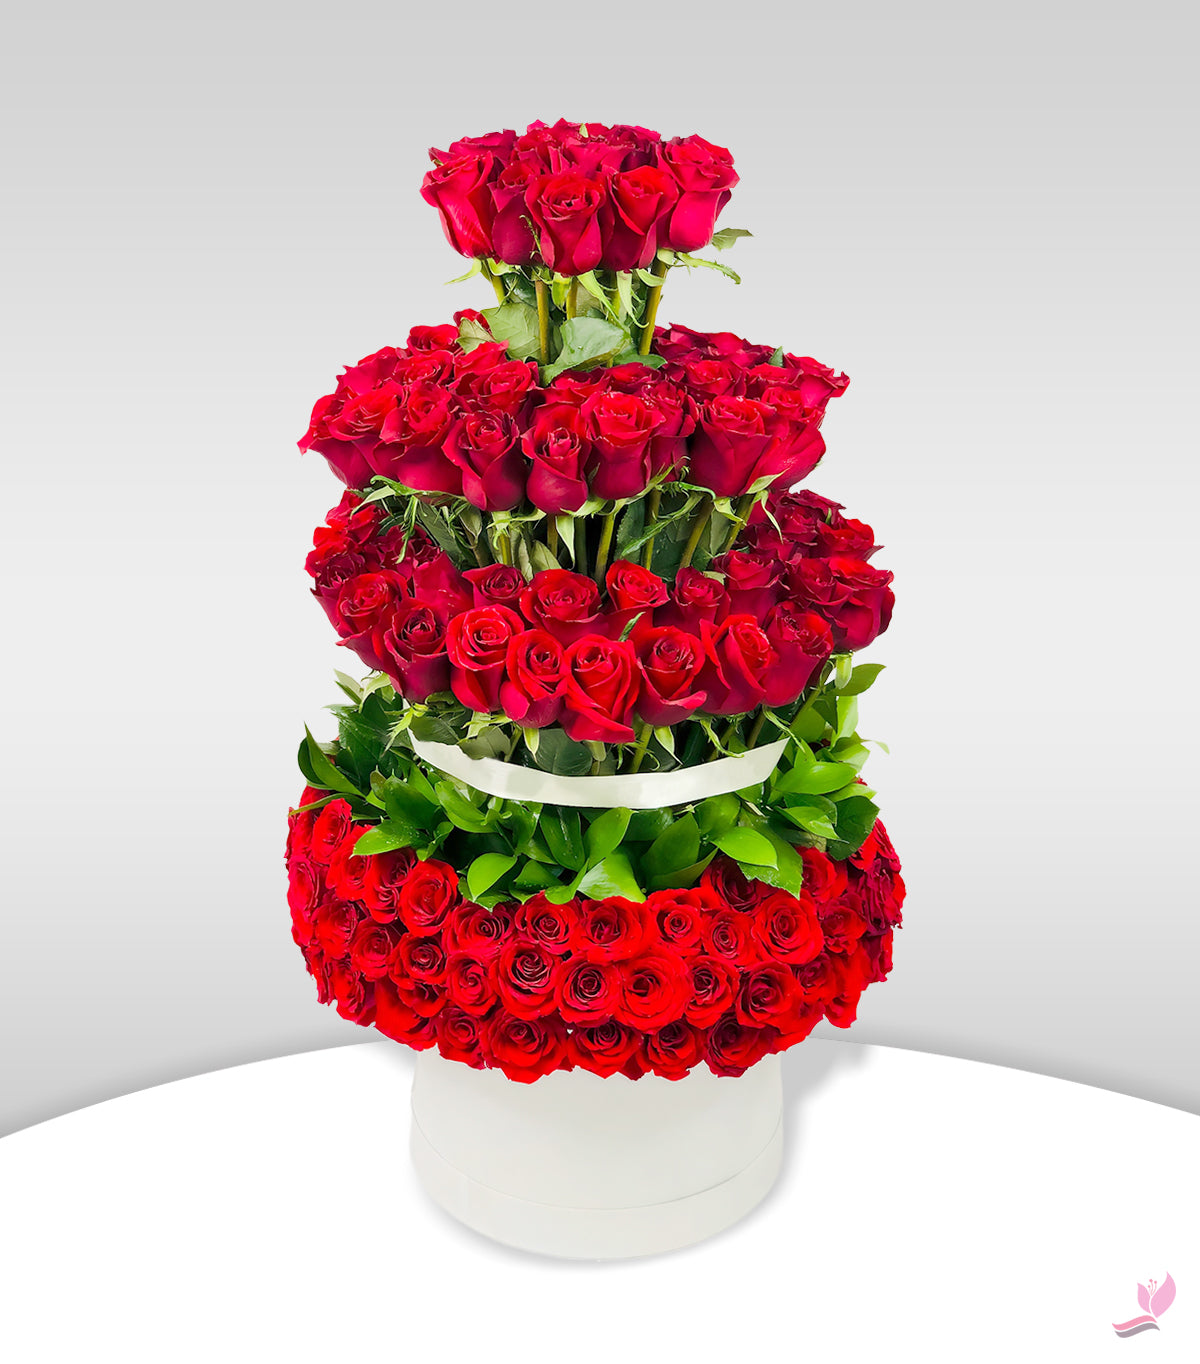 Red Rose Arrangement - Arabianblossom - Arranged In 4 Steps In A Box